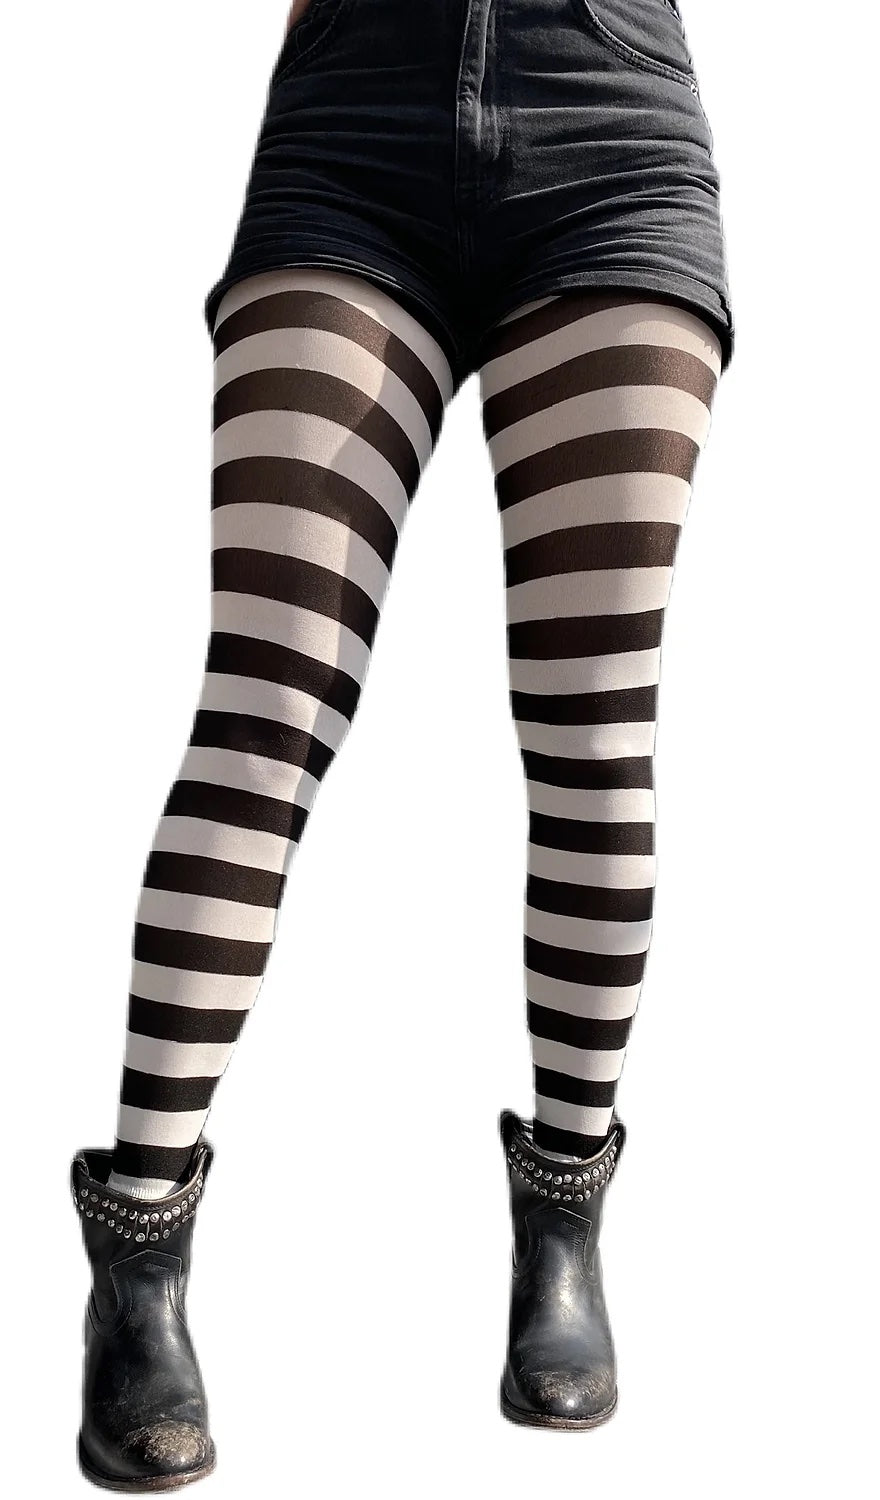 Striped Tights - Black and White